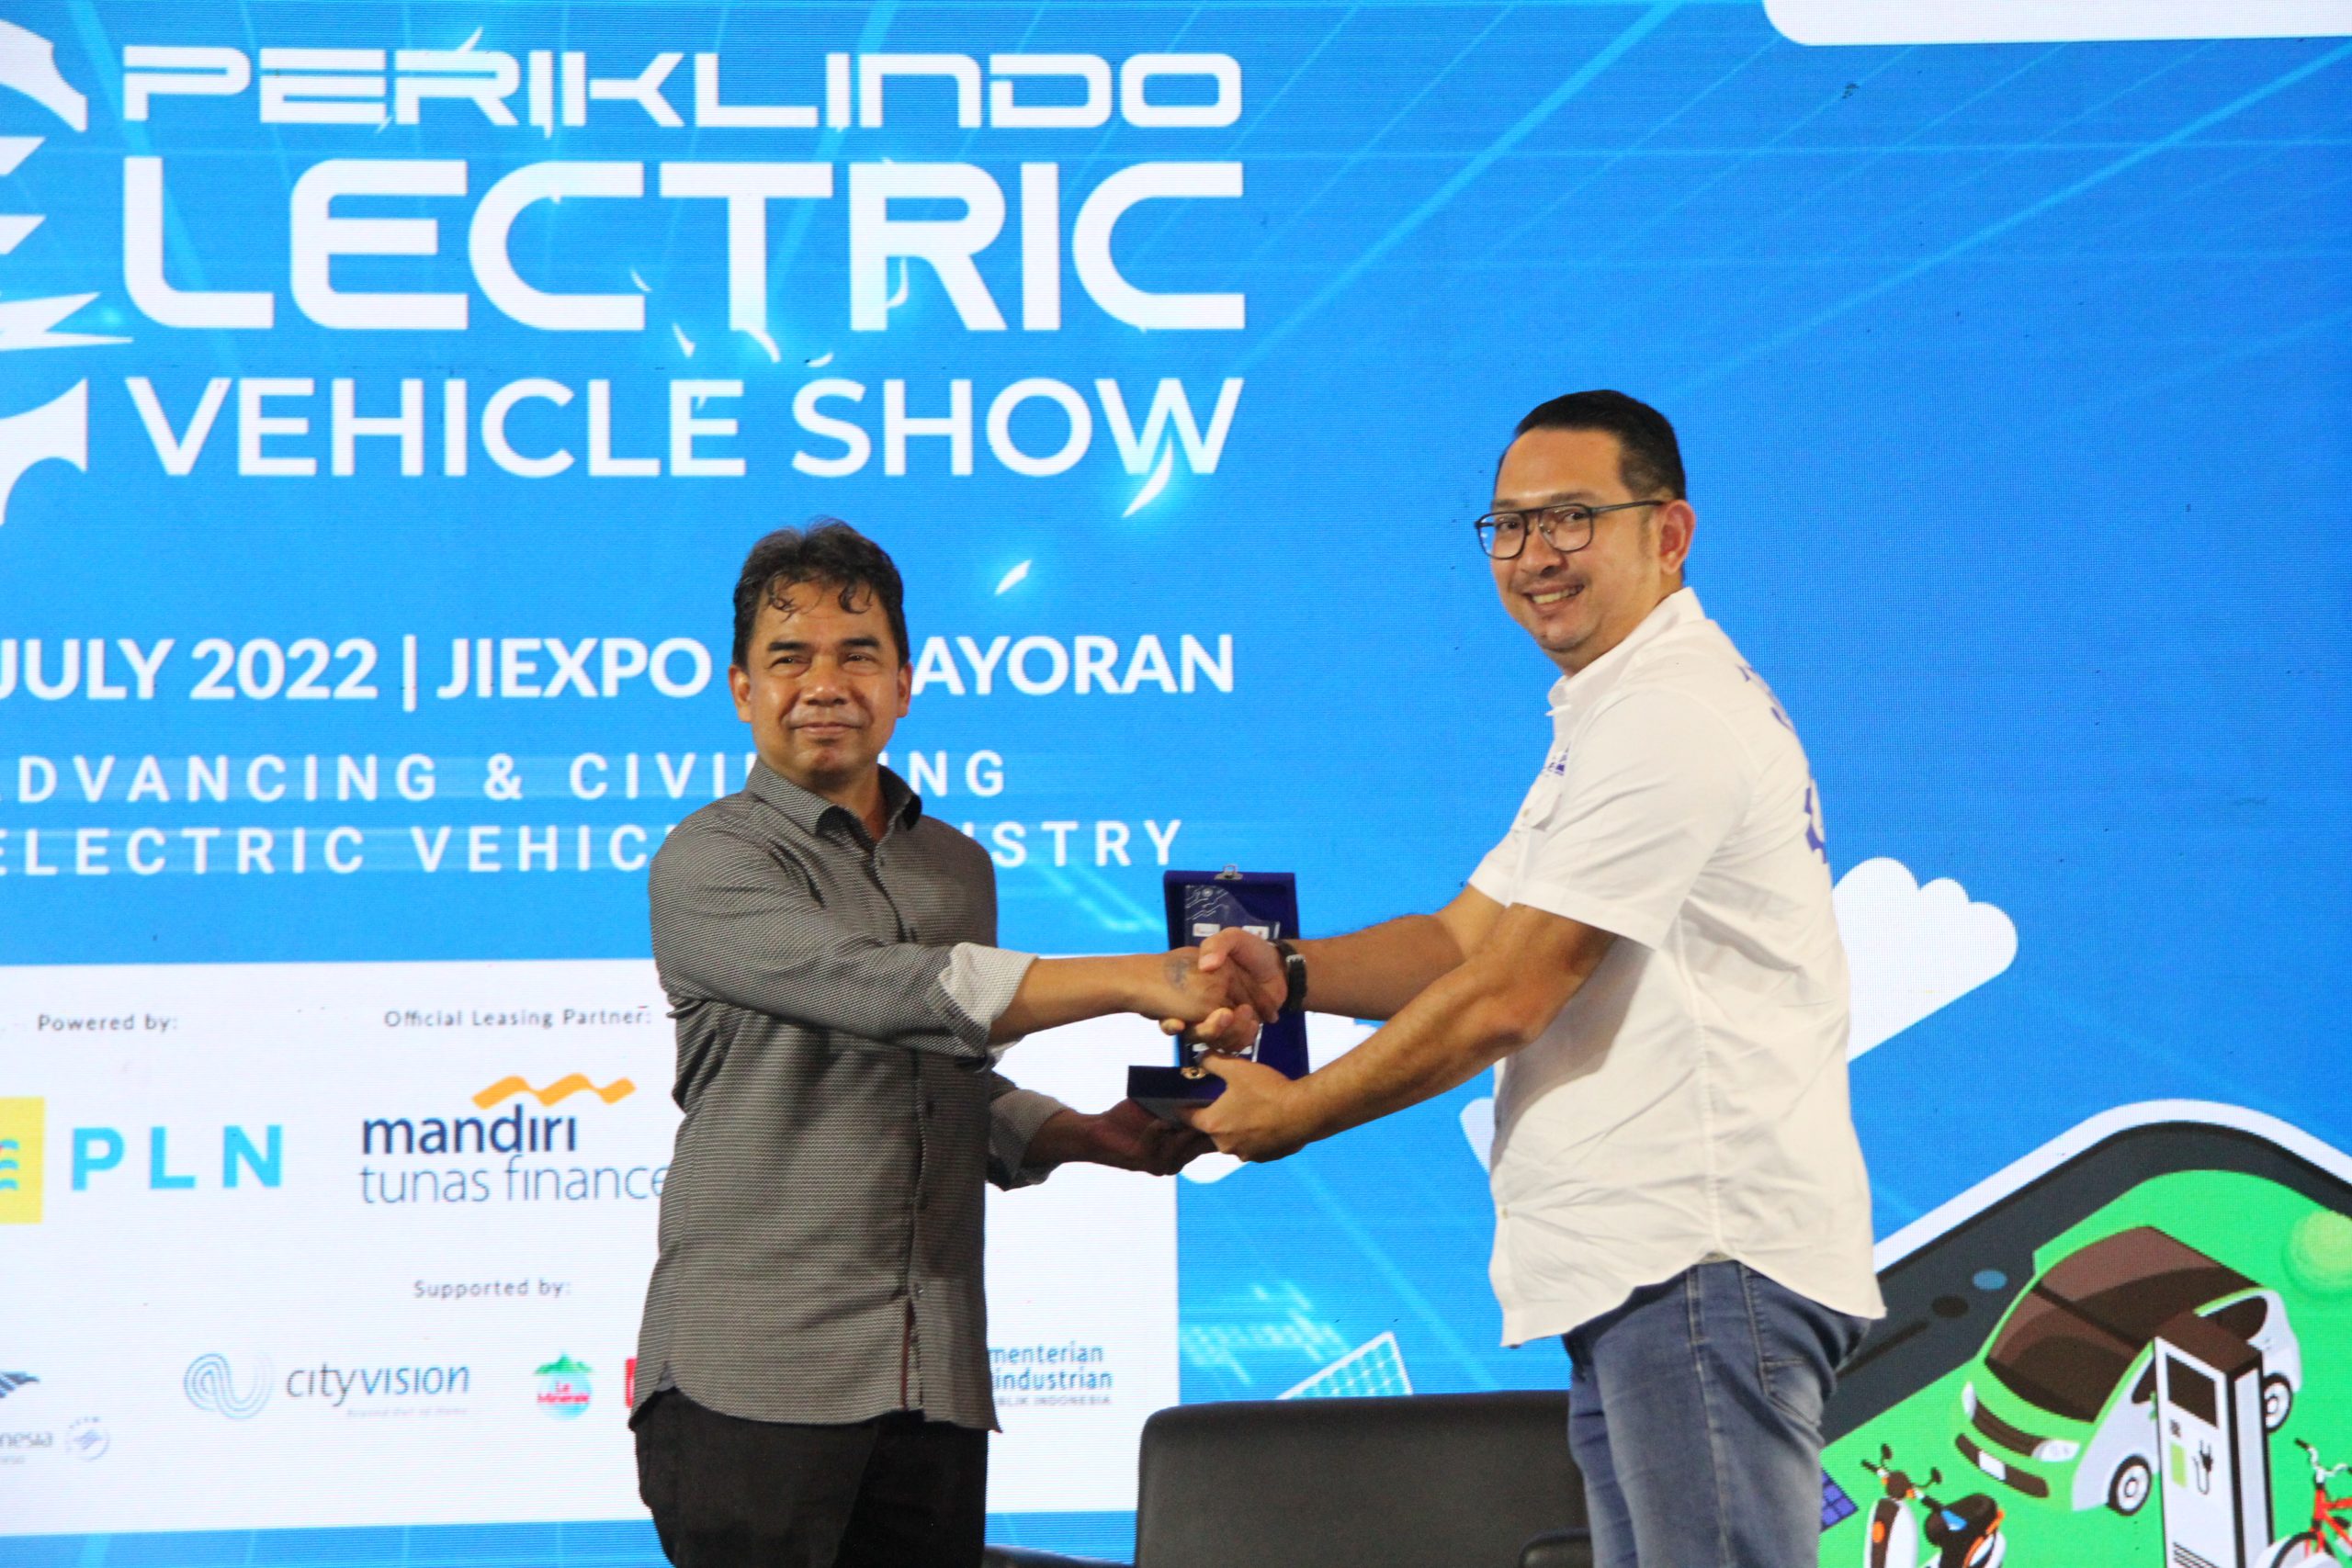 DAY 6 (PERIKLINDO ELECTRIC VEHICLE SHOW 2022)